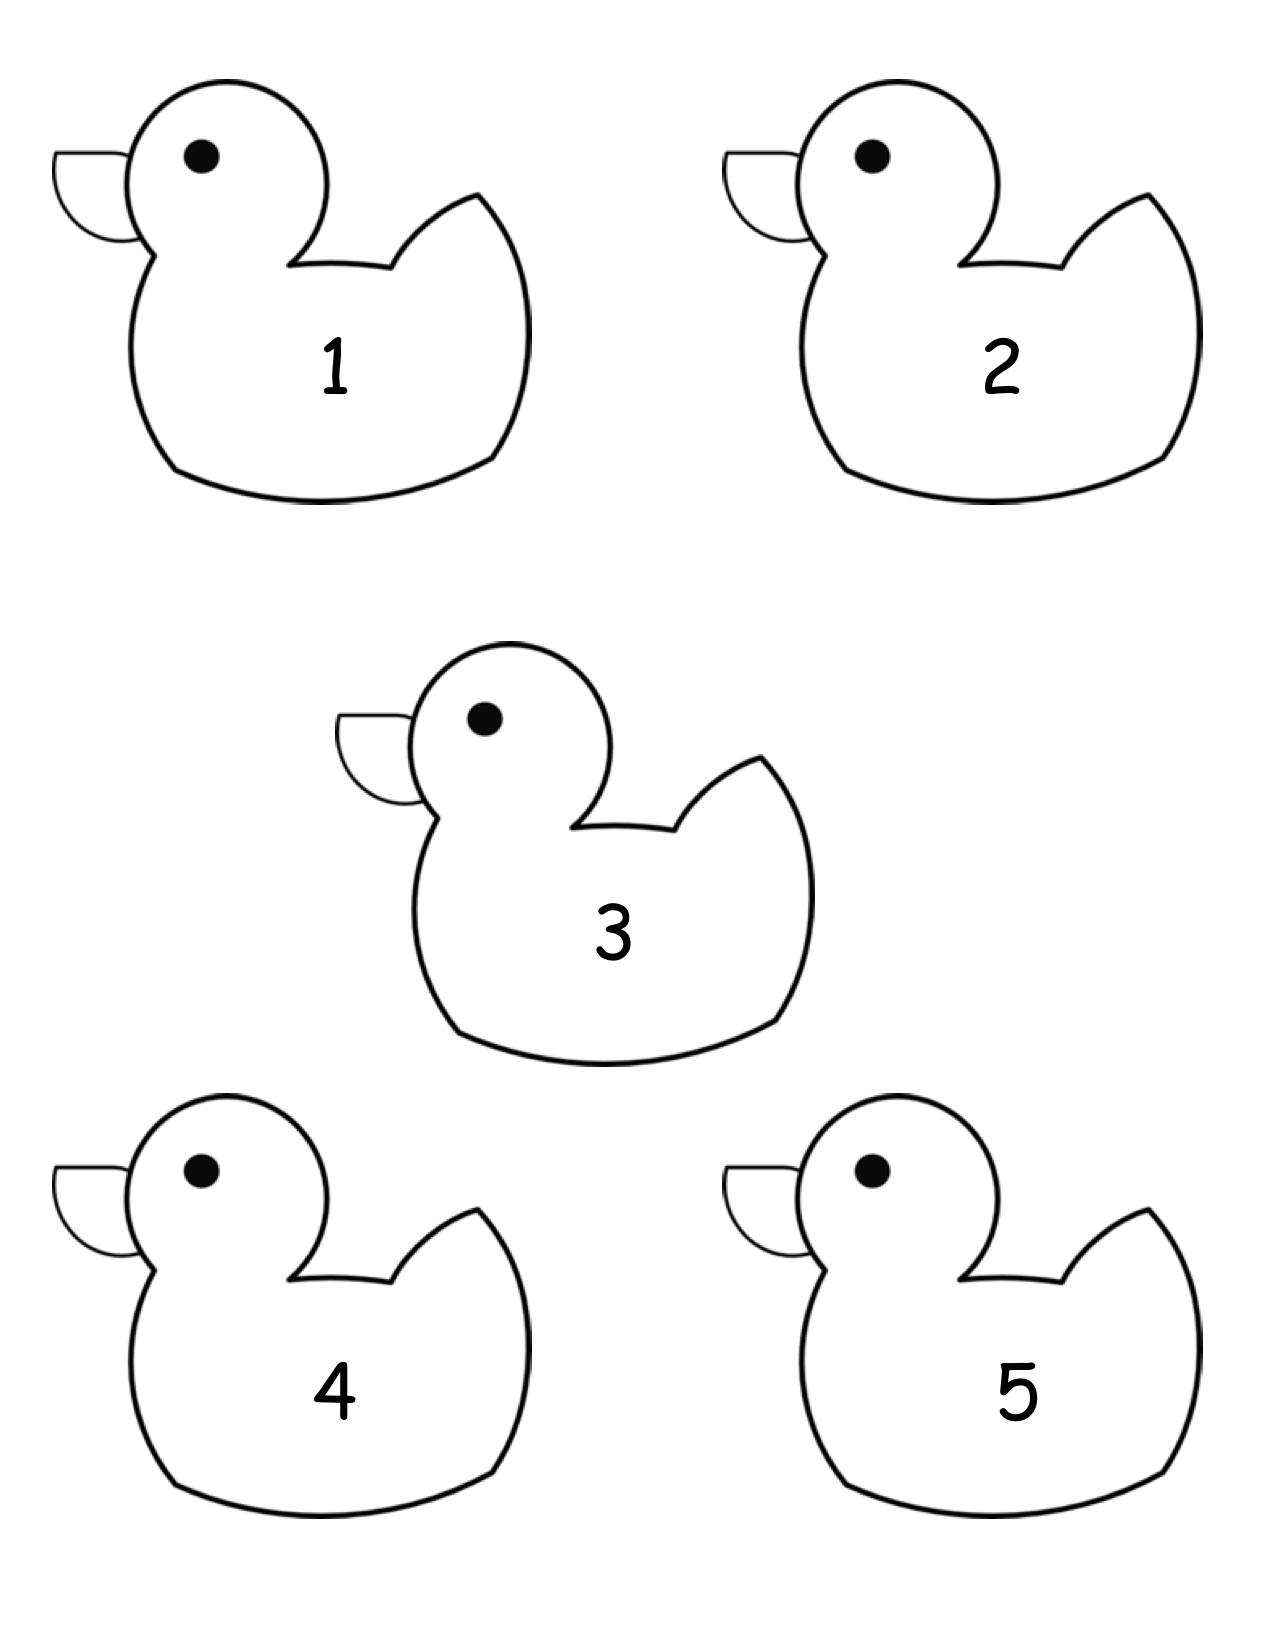 13 Best Images Of Counting And Matching Numbers Worksheets Montessori Preschool Homework